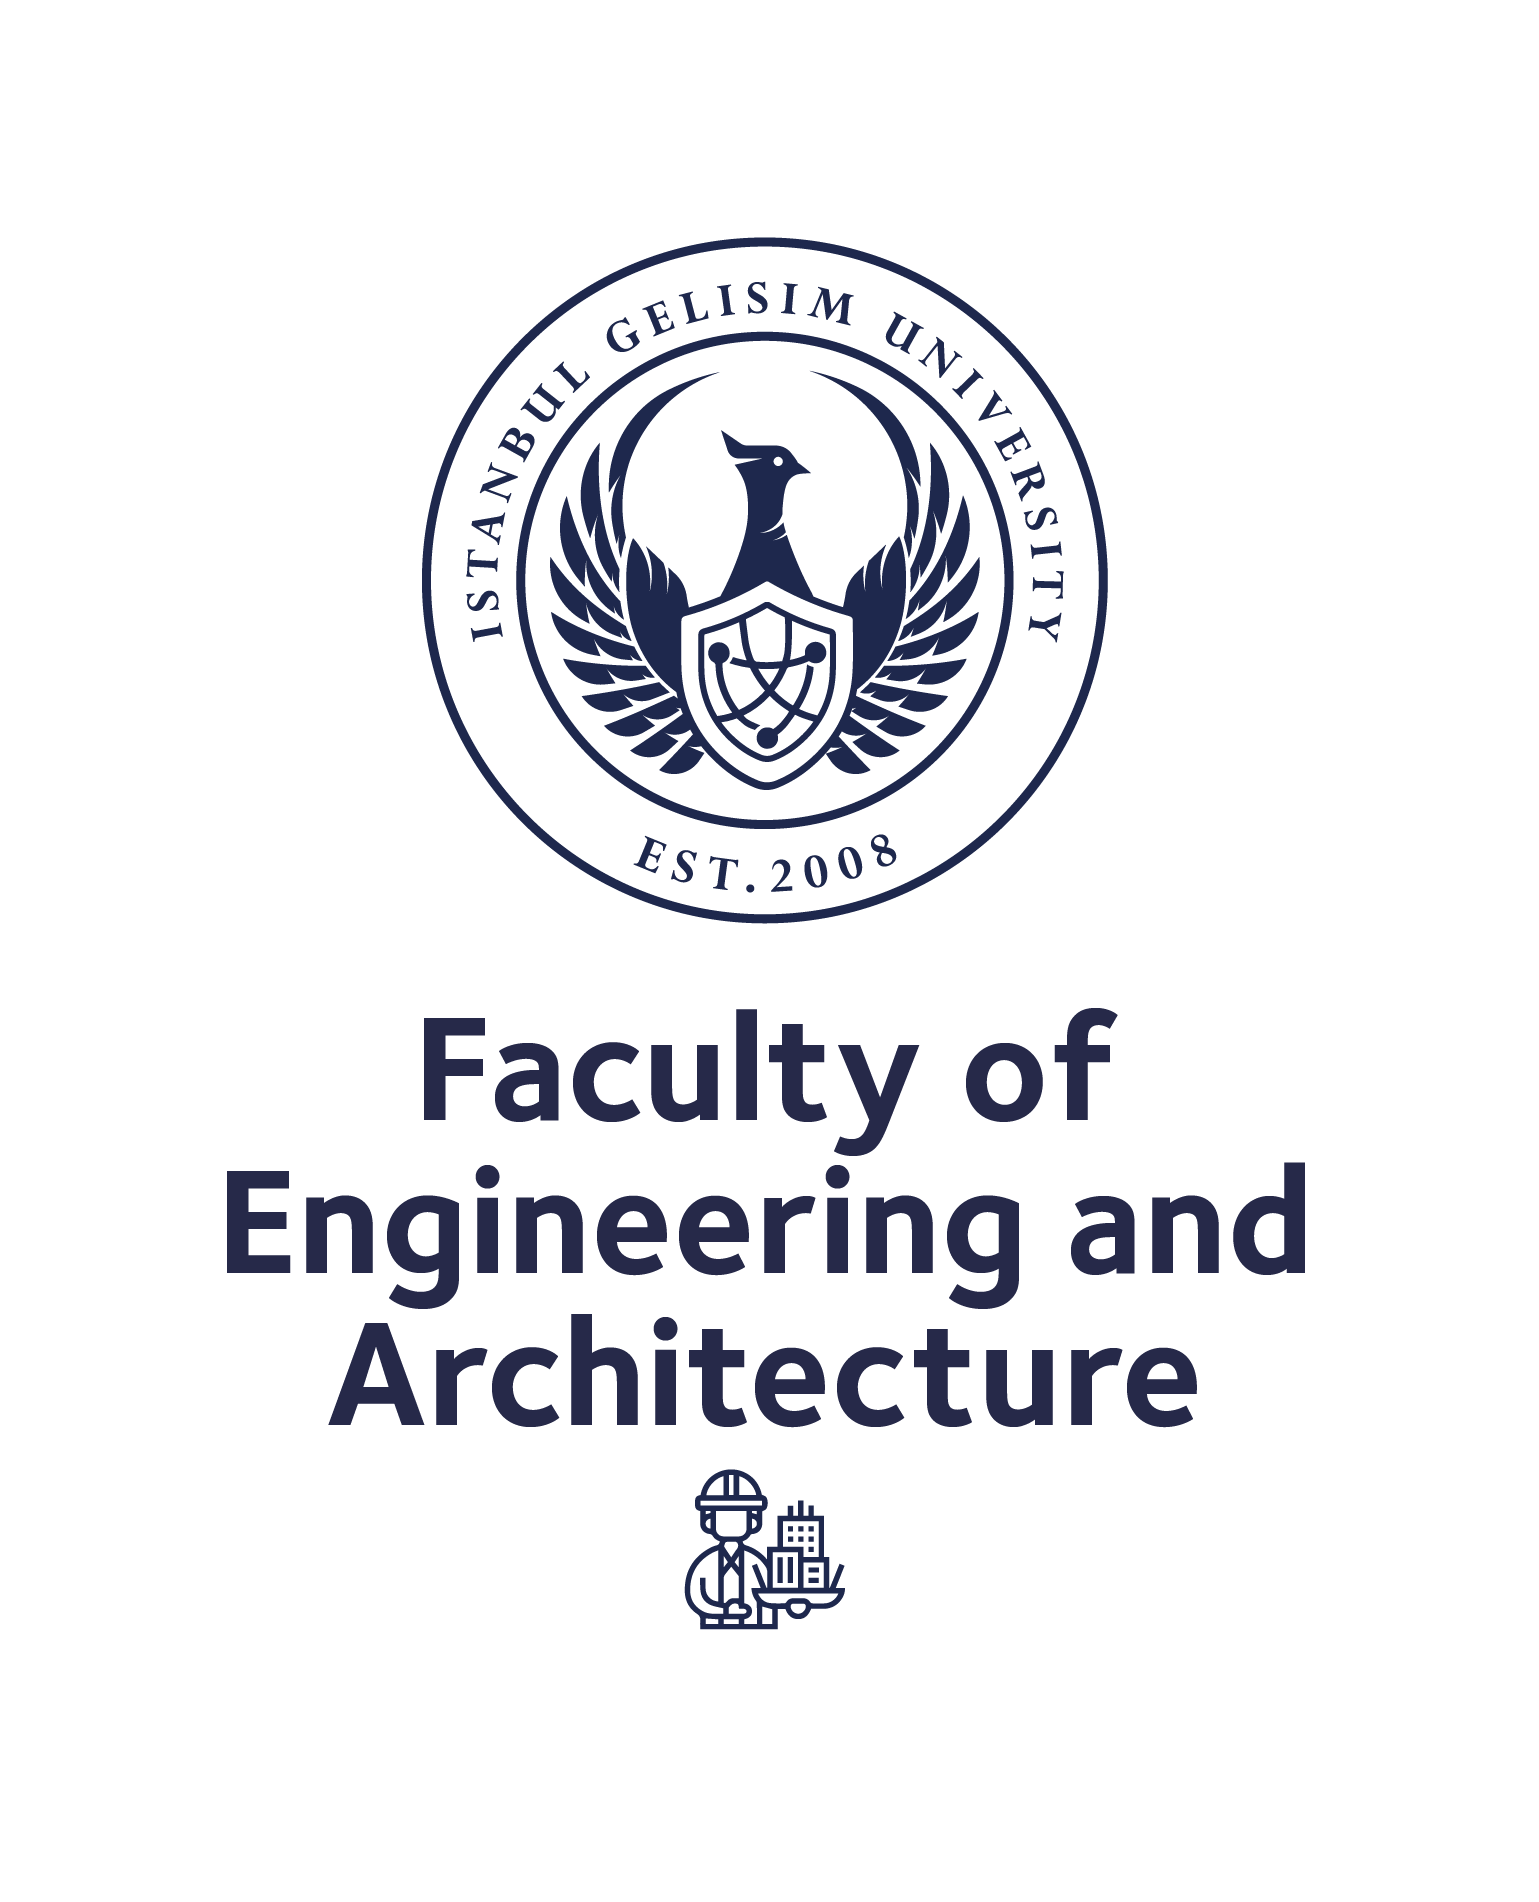 Faculty Logos Faculty Of Engineering And Architecture